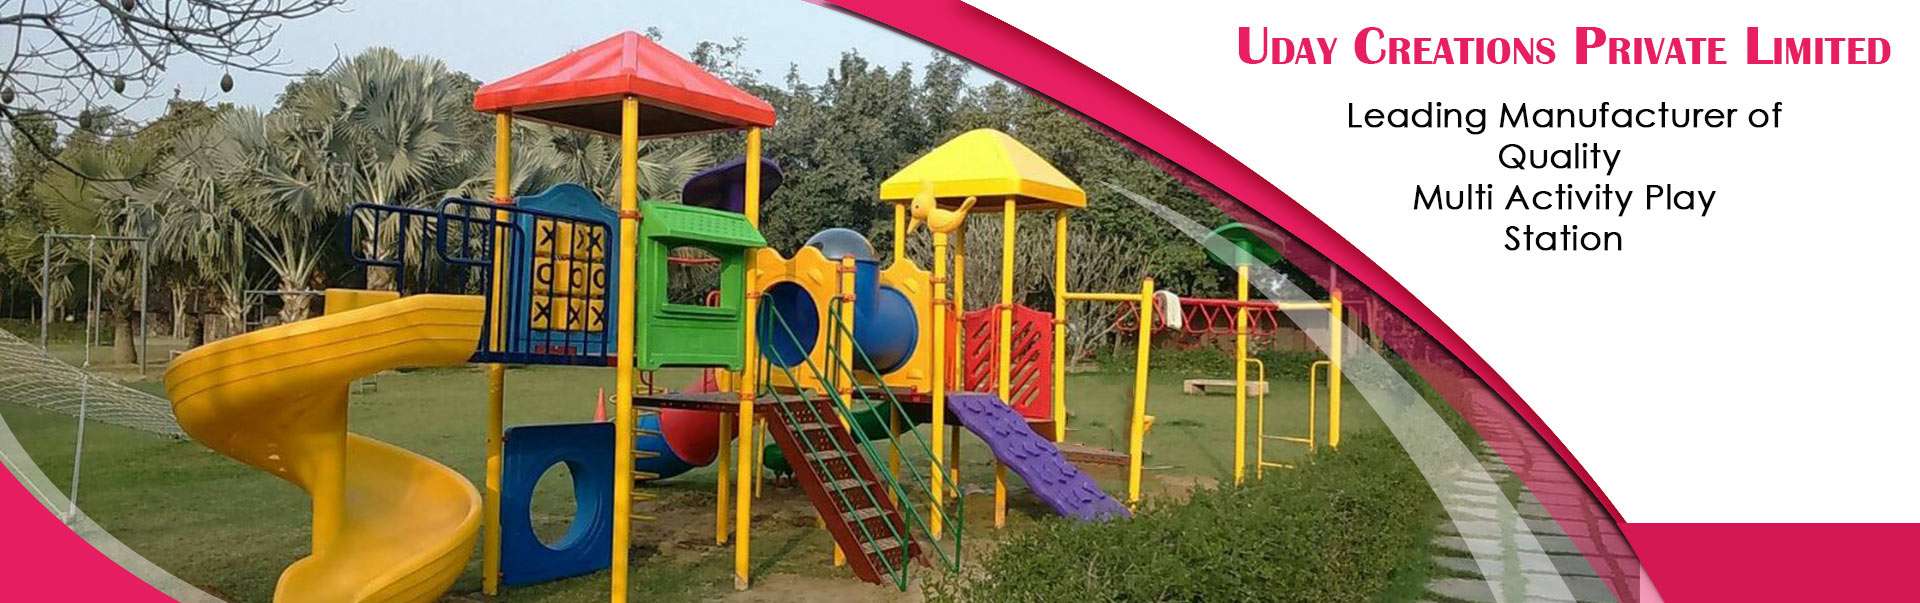 Uday Creations Pvt Ltd in Nagpur